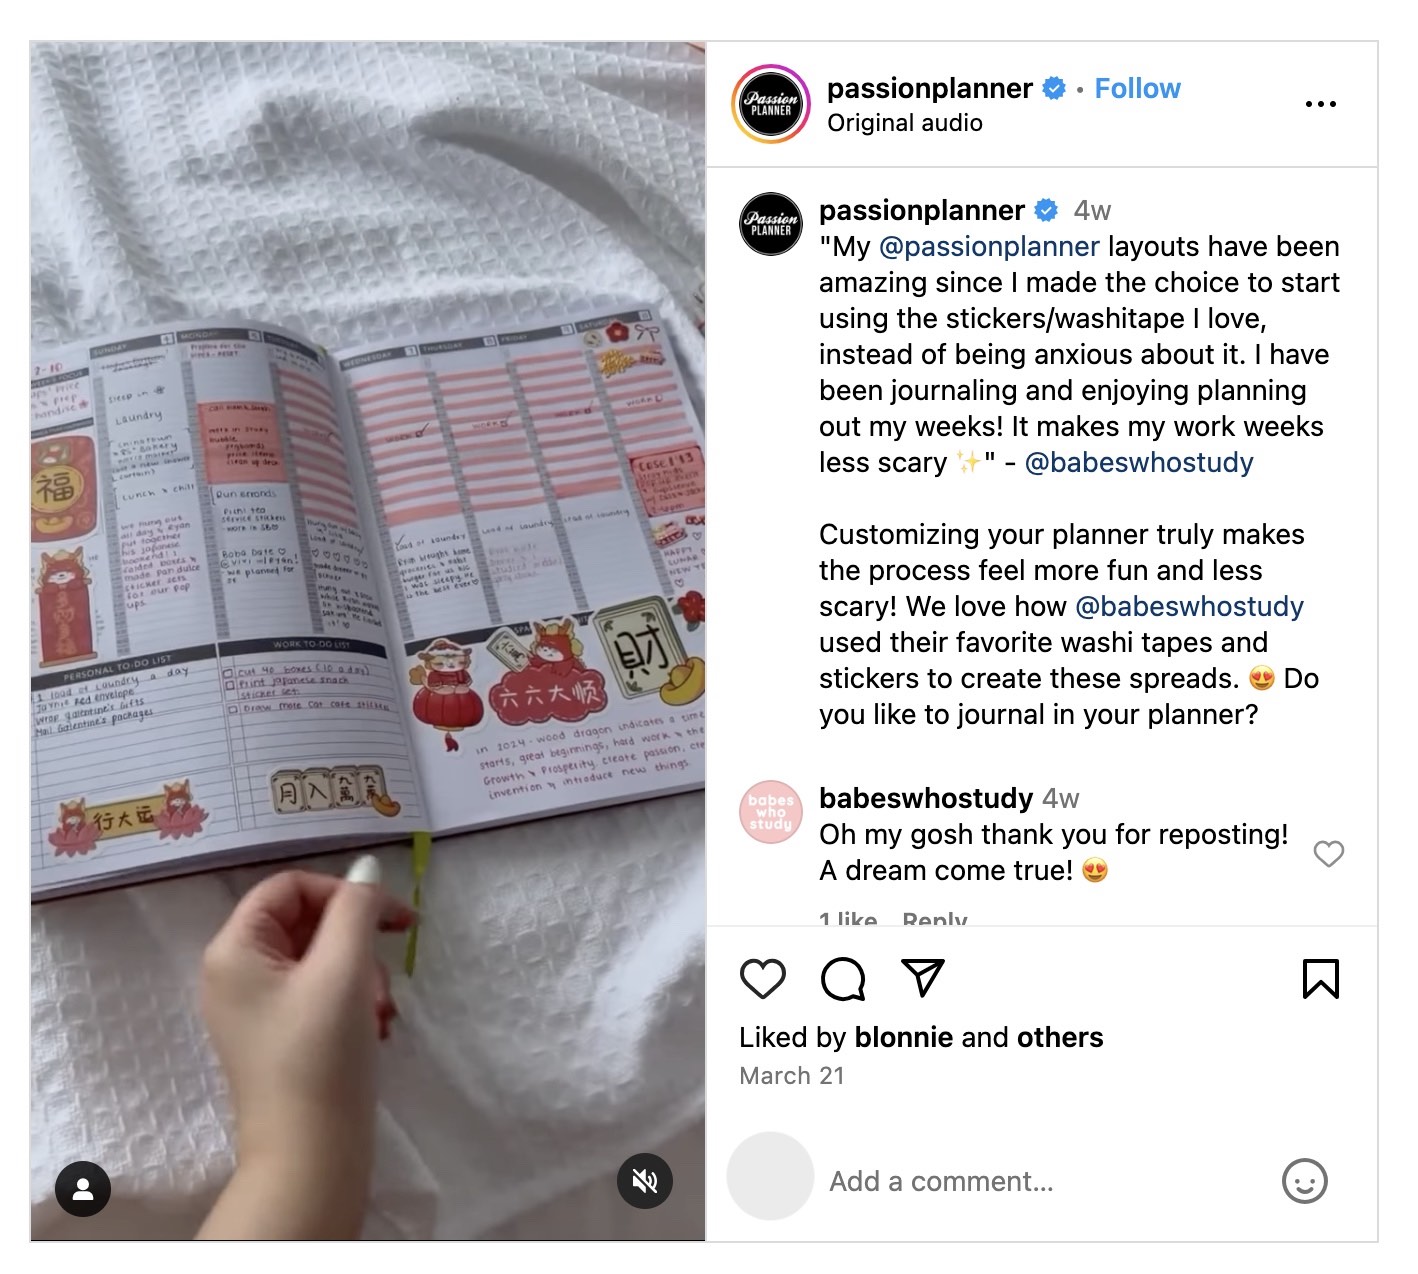 Post connected  Instagram by 'Passion Planner' featuring user-generated contented  of a lawsuit    utilizing 1  of their products.